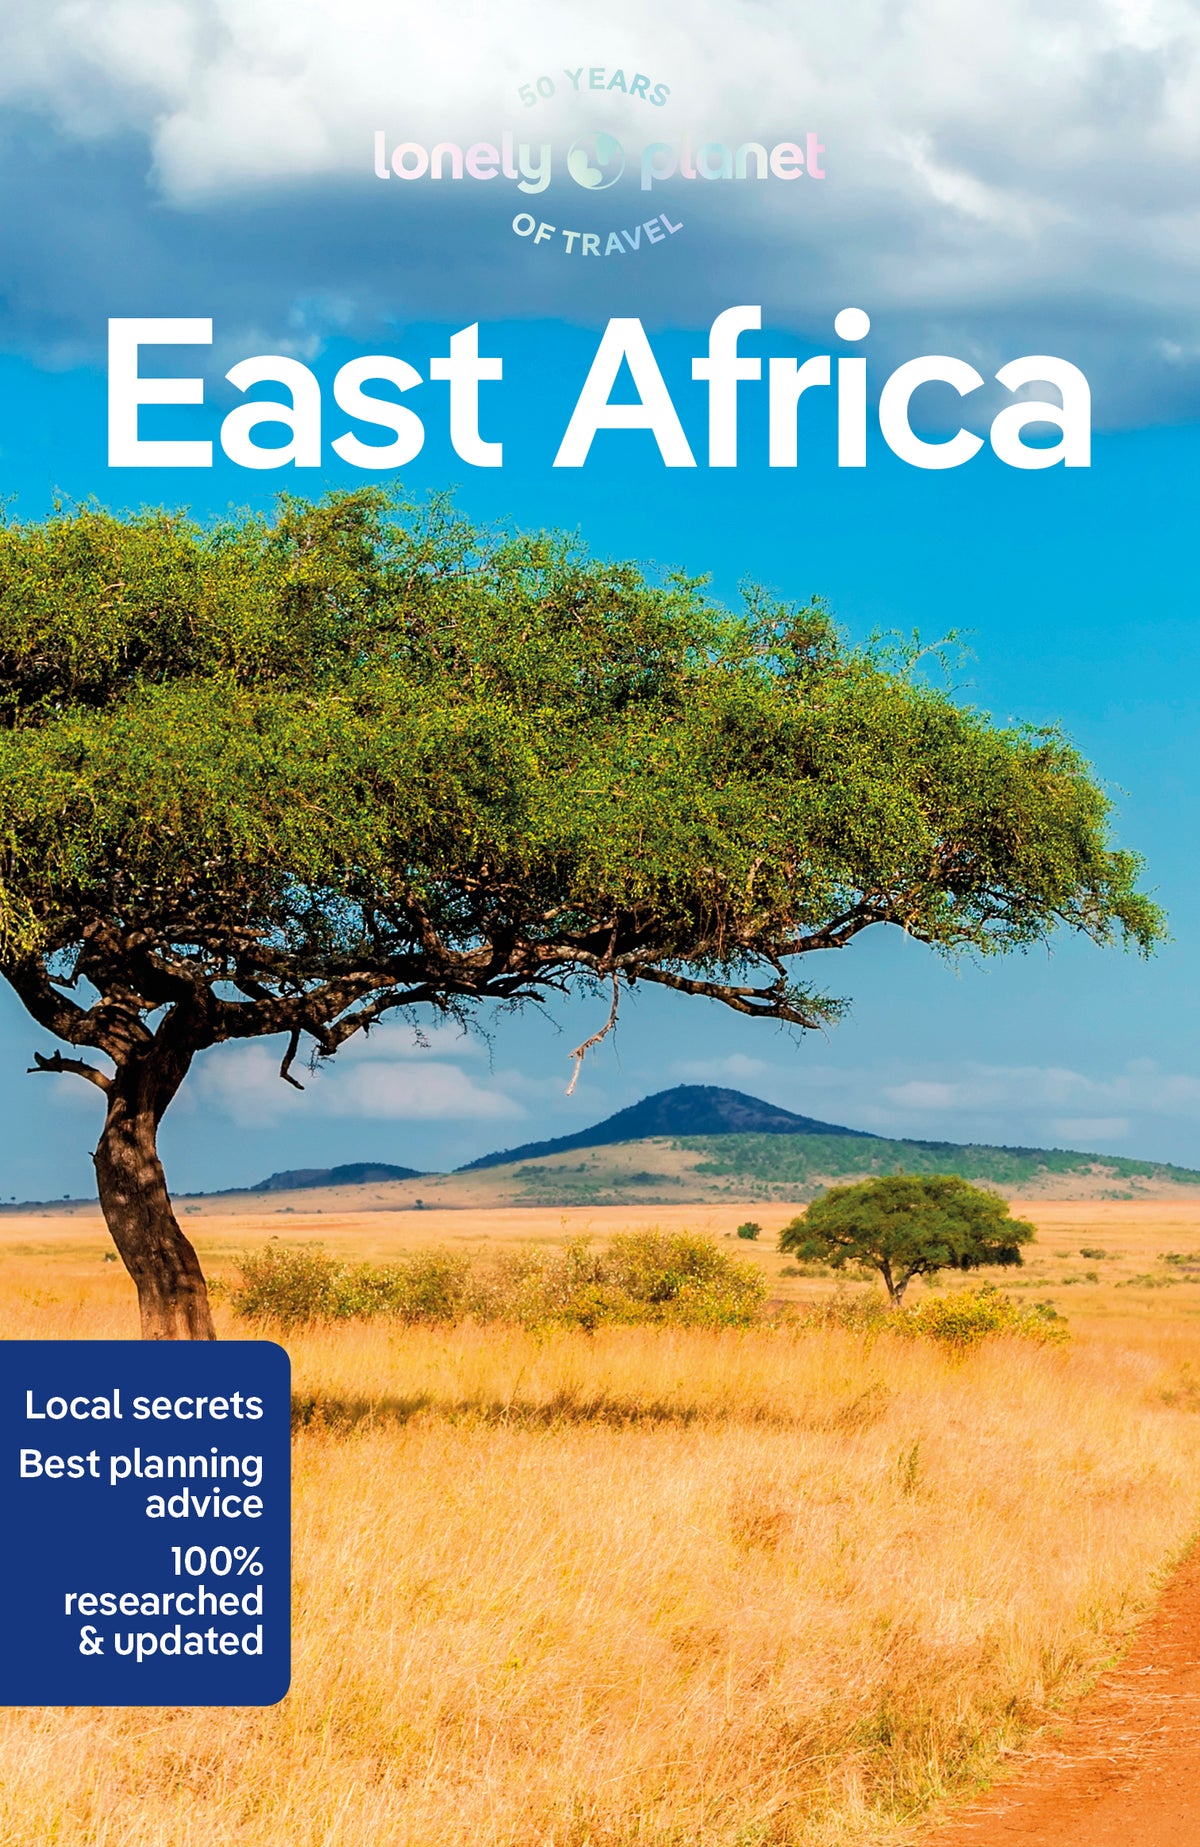 East Africa Travel Book and eBook